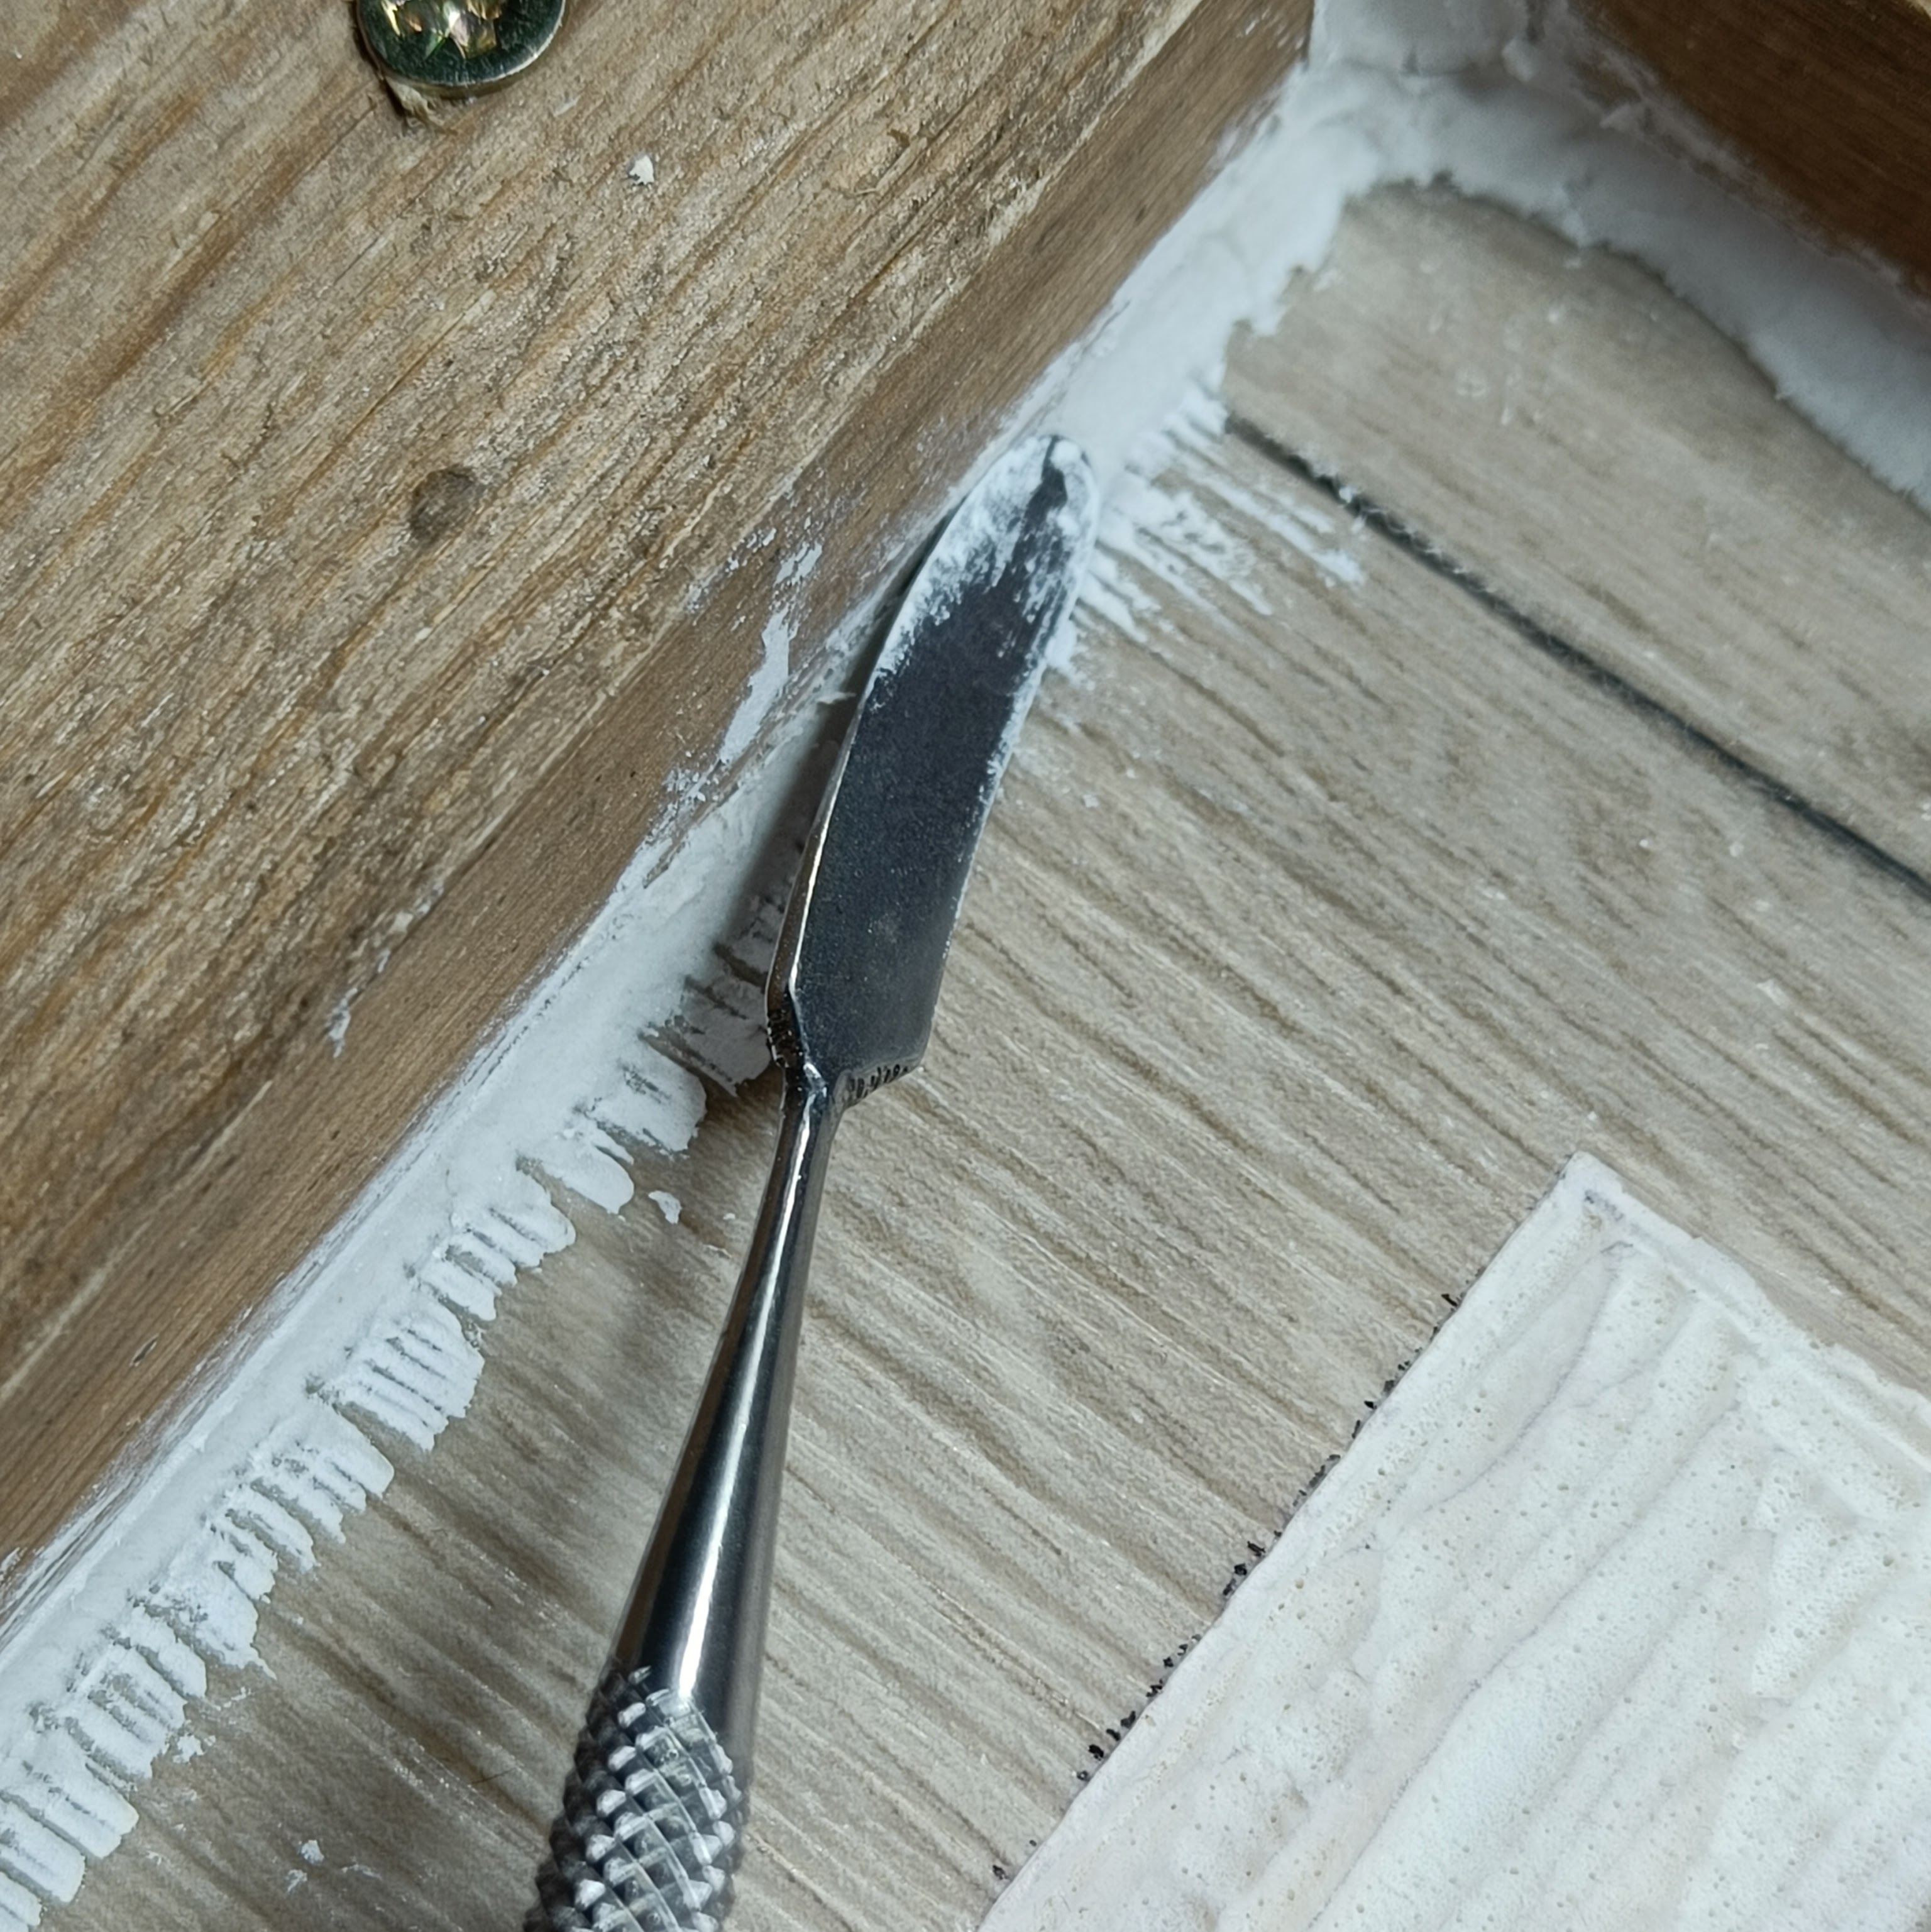 a close up of where the vinyl meets the edge of the
  frame. Modelling clay has been somewhat messily pressed into
  the edge, and a metal tool with an elongated spatulate
  business-end is pressed into the clay.